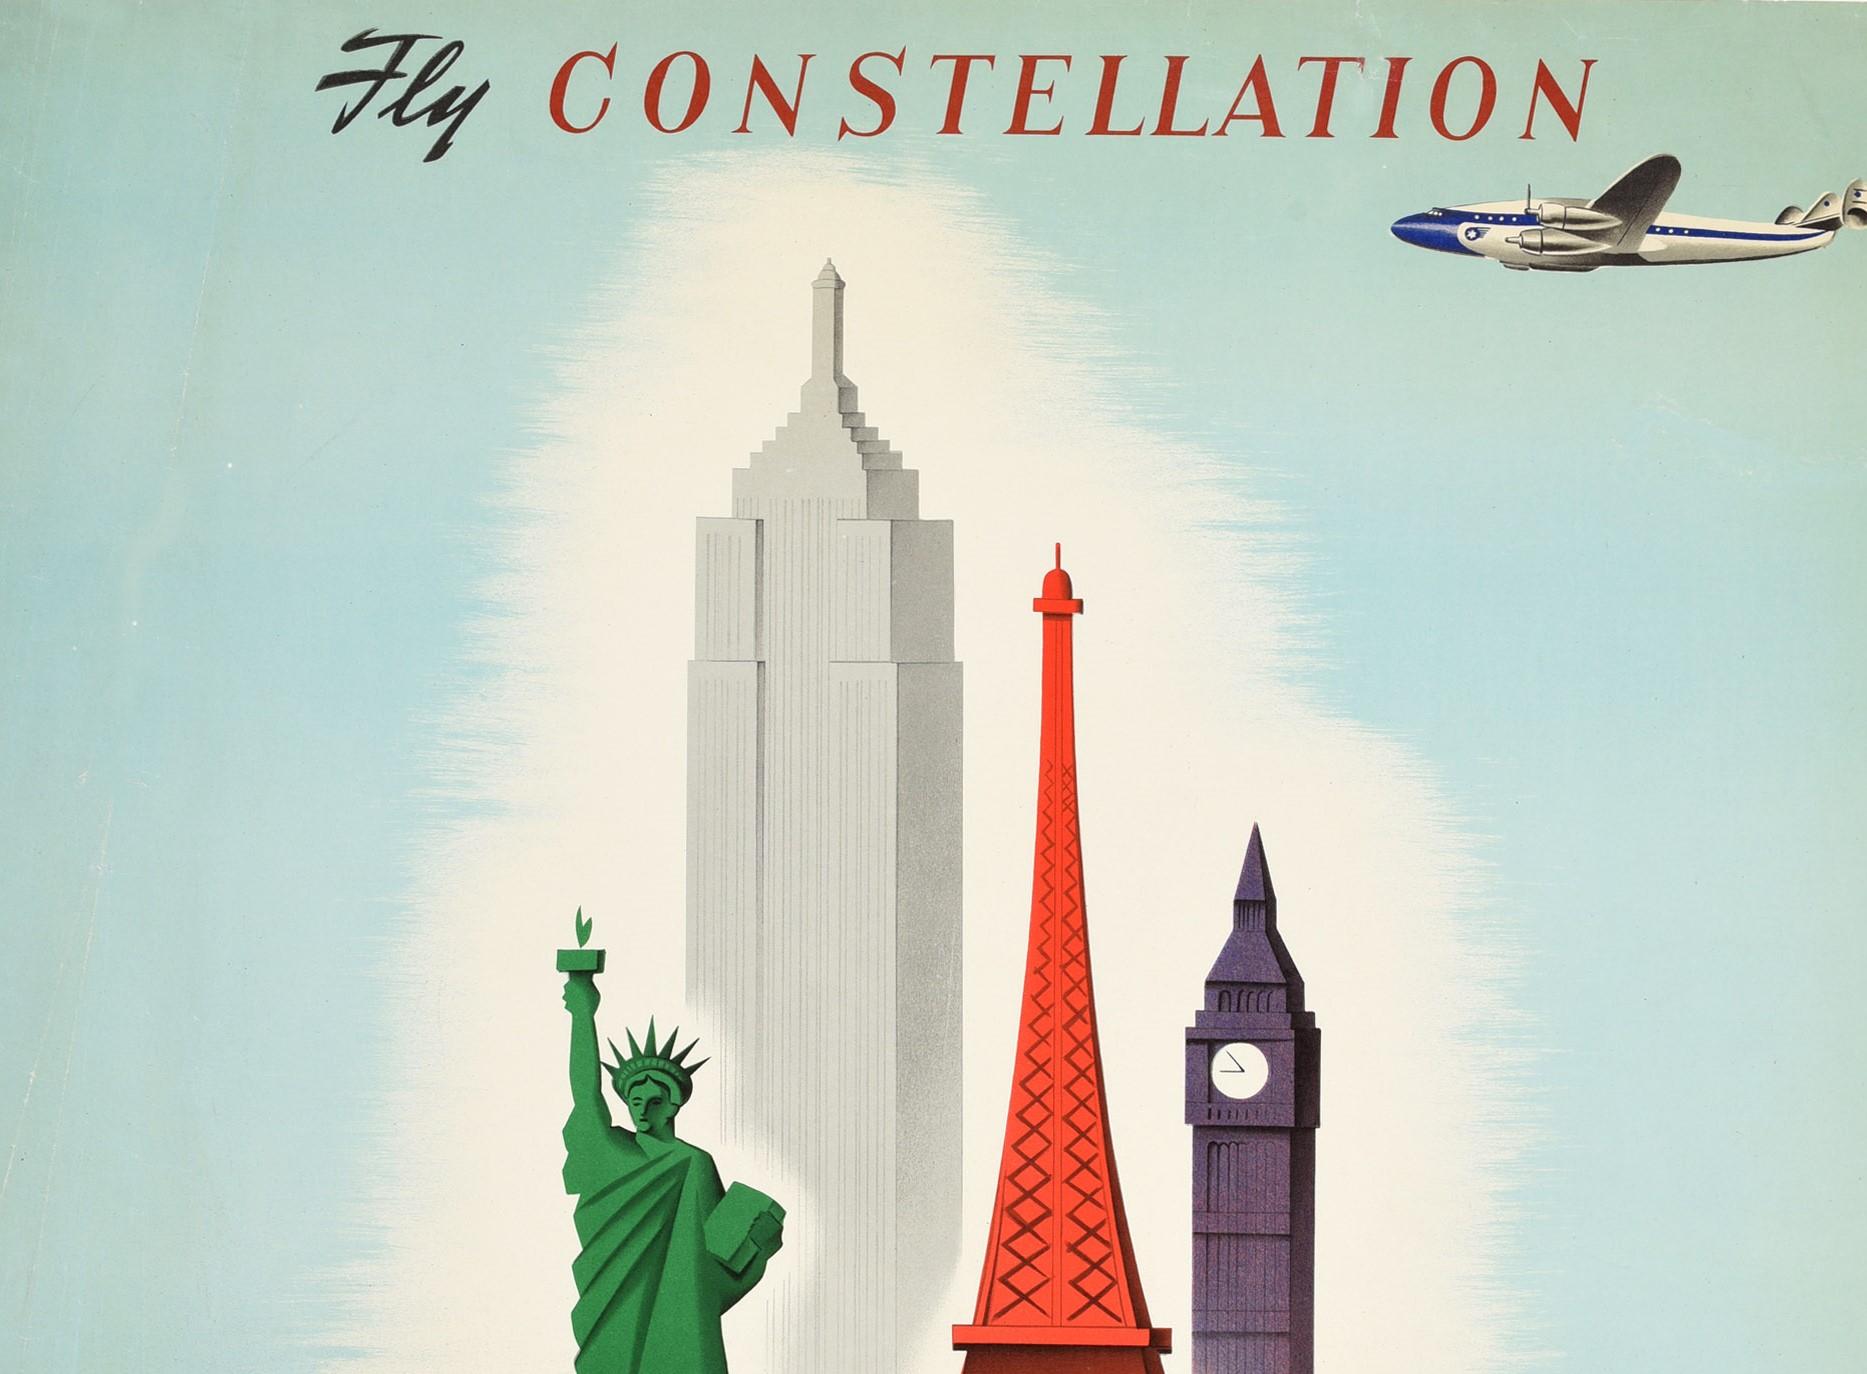 Original vintage air travel advertising poster, Fly Constellation to Four Continents El Al Israel Airlines - featuring a great design by the Israeli graphic designer Franz Krausz (1905-1998) depicting famous landmarks from different countries on